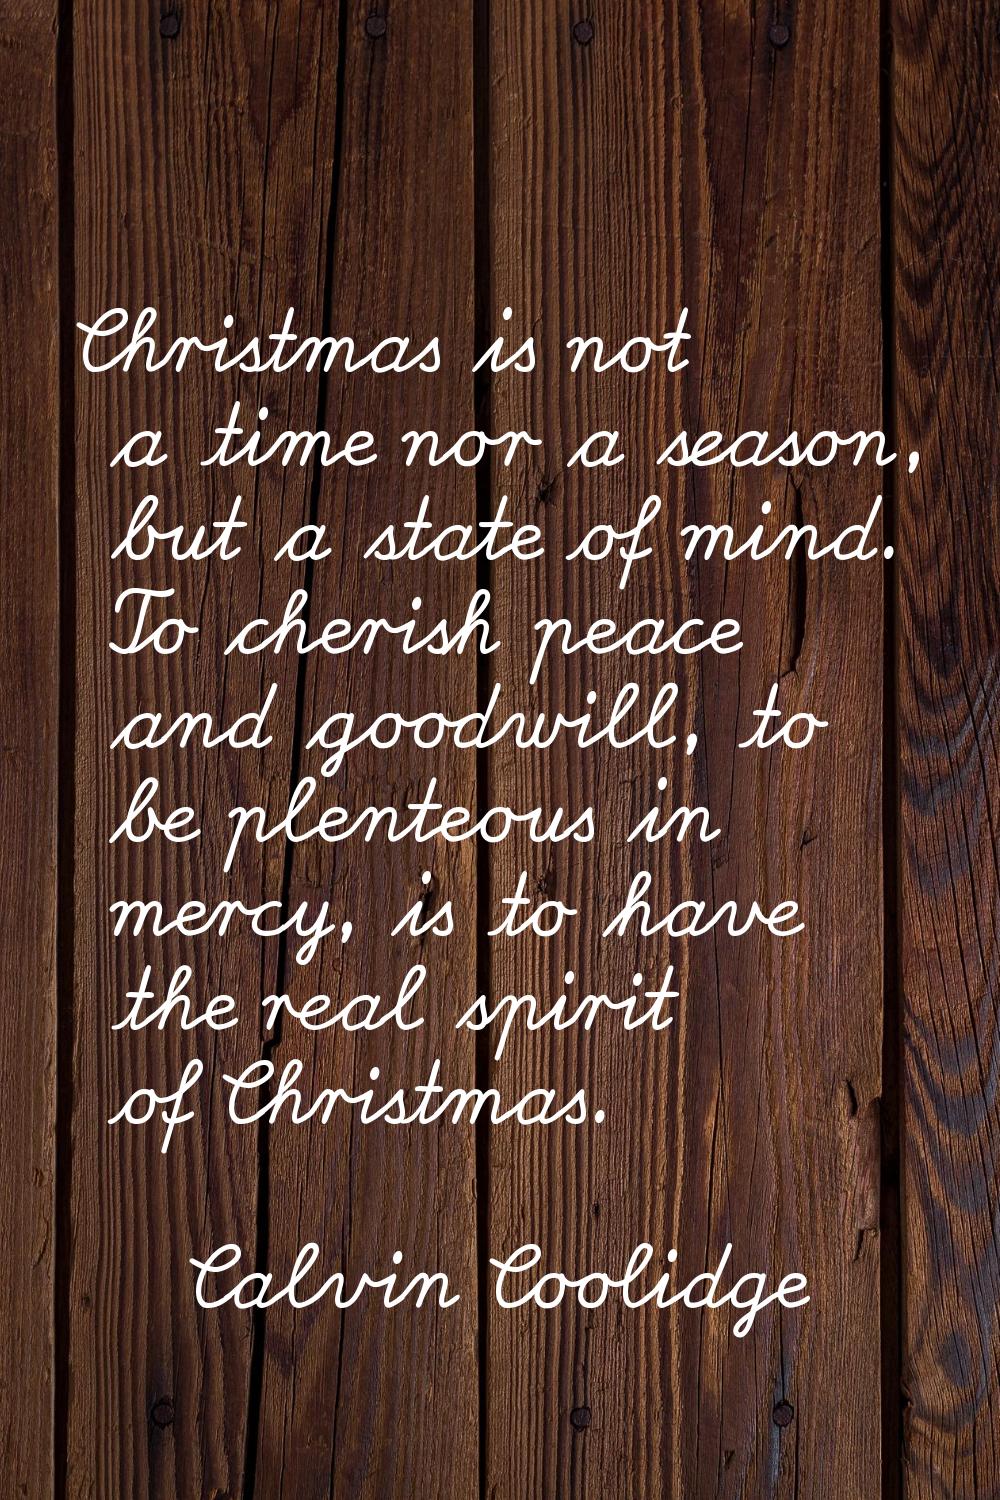 Christmas is not a time nor a season, but a state of mind. To cherish peace and goodwill, to be ple